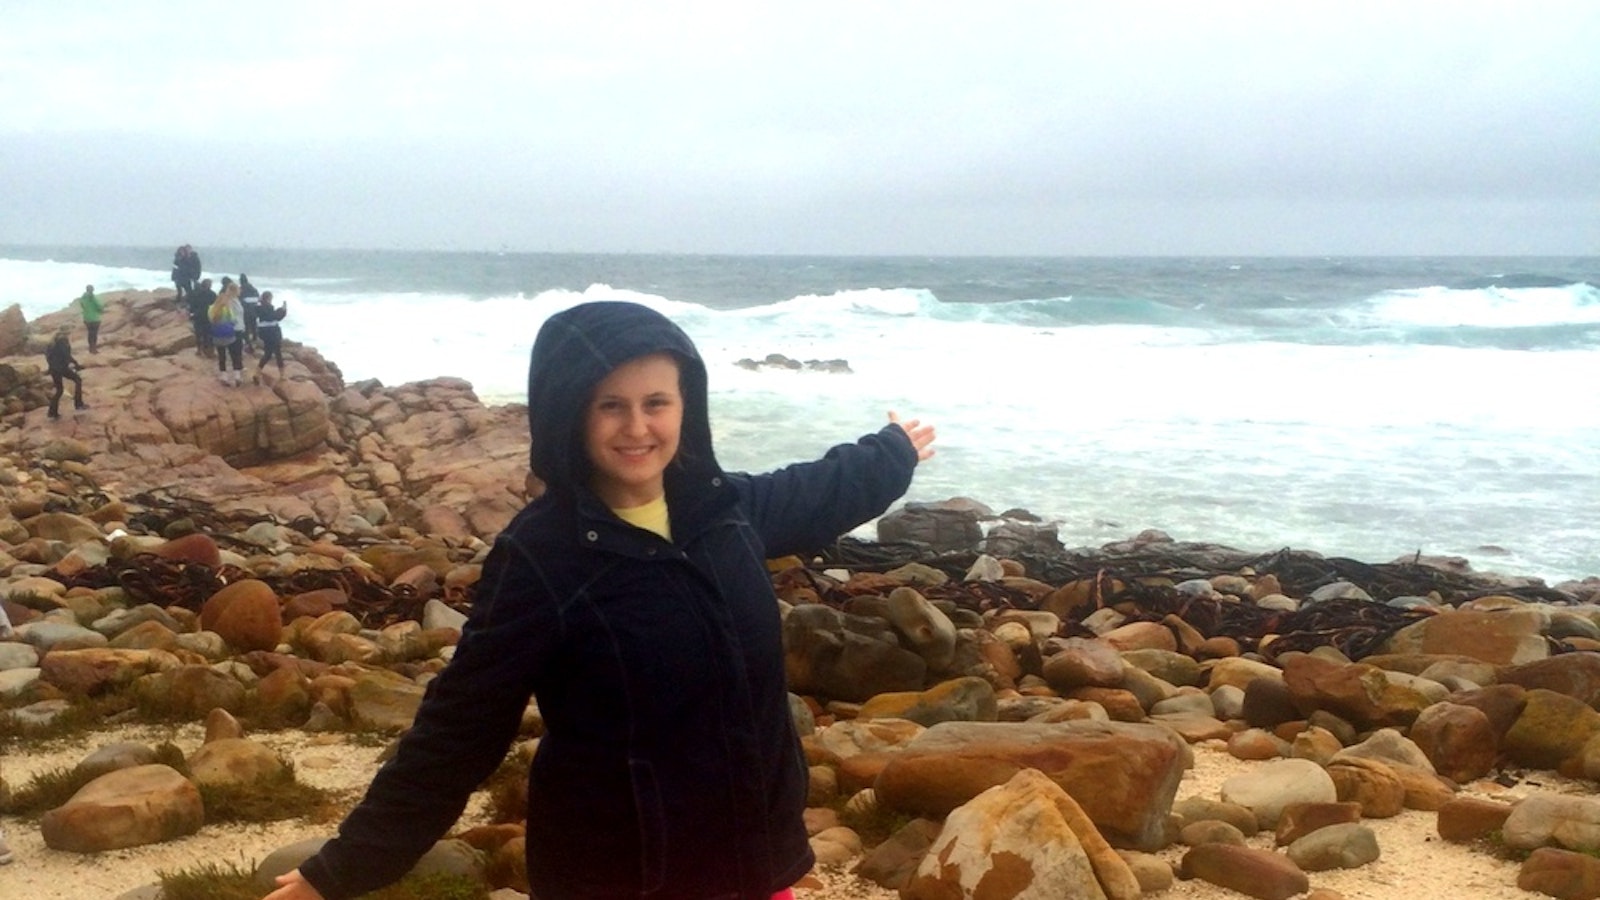 Enjoying the view at Cape Point